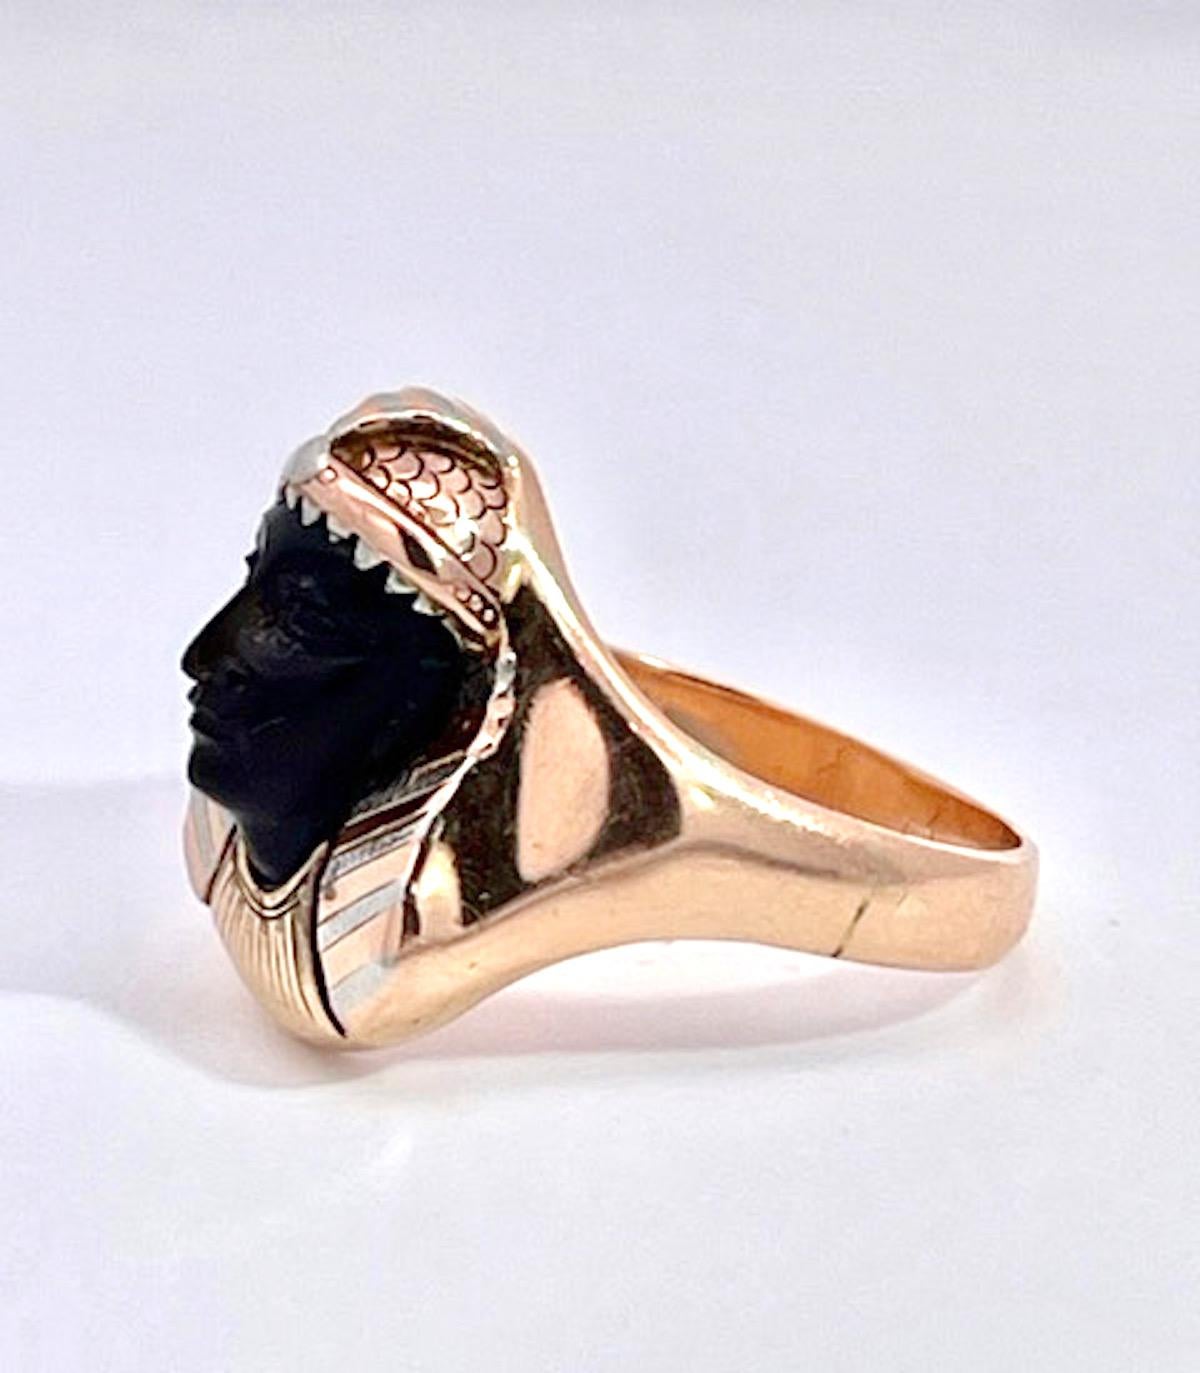 This Egyptian Revival Black Onyx Pharaoh Ring is set in tri-color gold with alot of detail.  The carved Onyx face is exquisite in perfect condition and gives this ring such a calming serene presence.  Once you put this ring on your finger you will